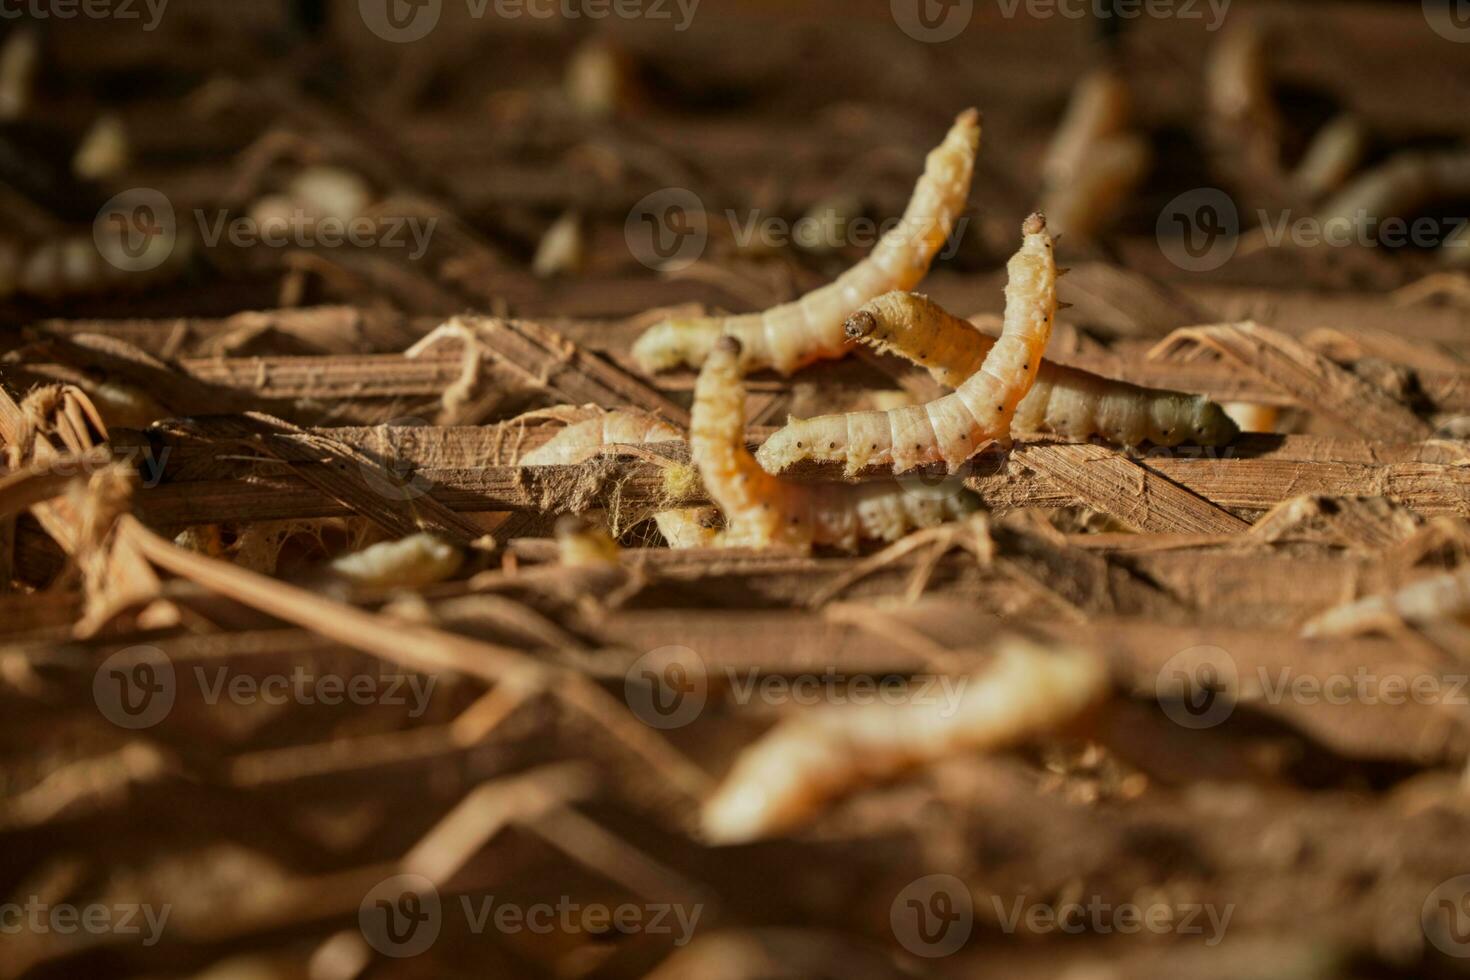 Silkworms that get warm sunlight in the morning. photo